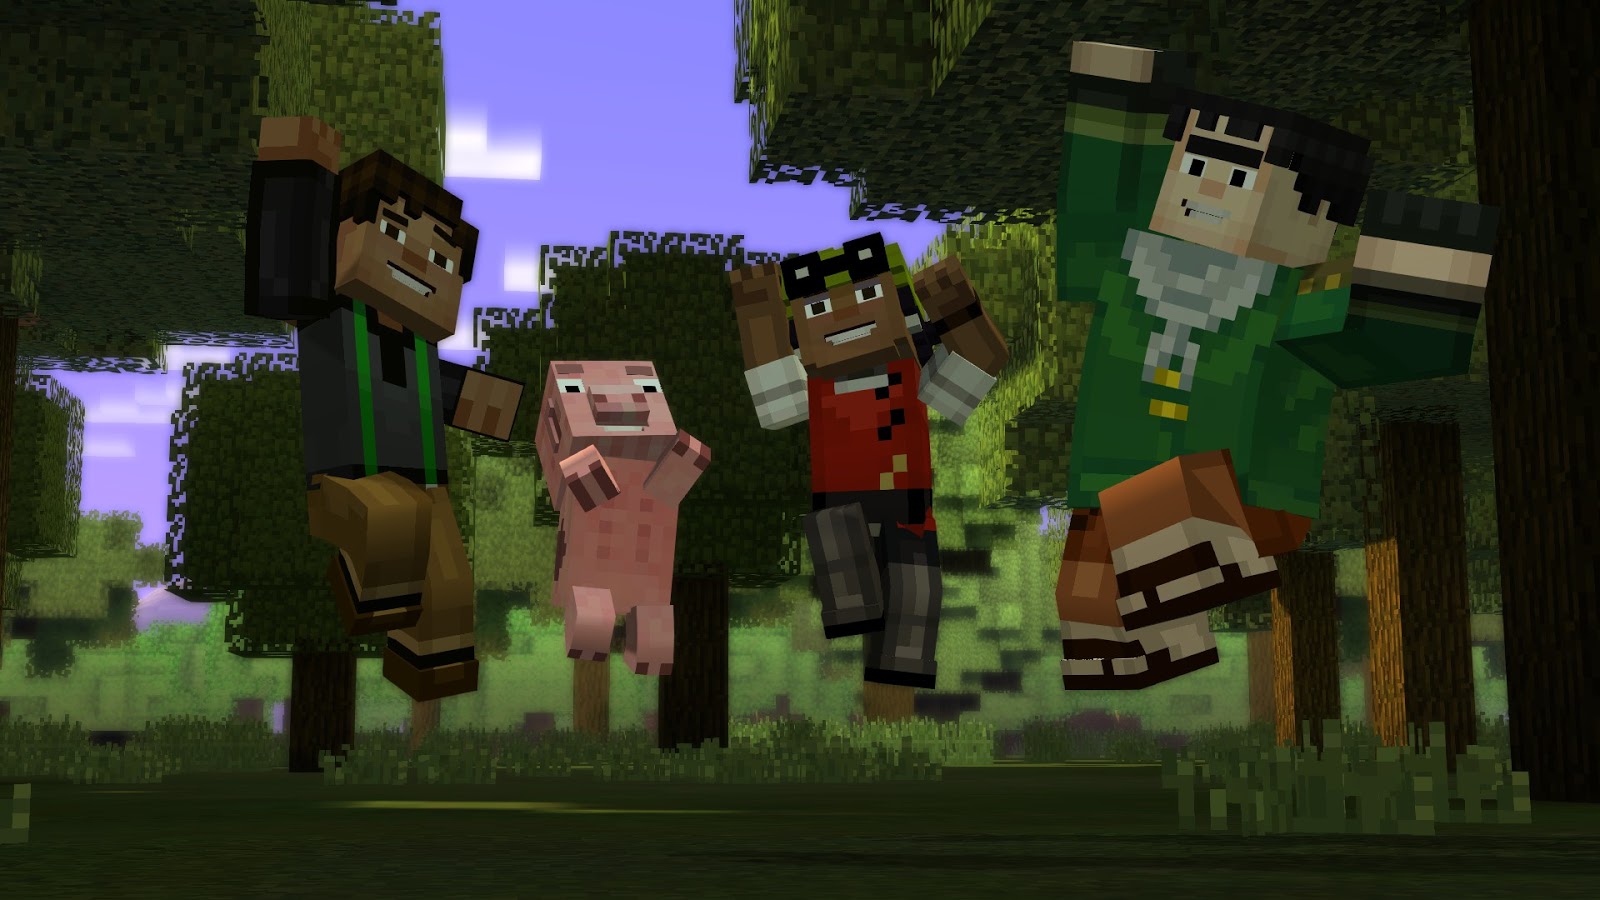 Minecraft: Story Mode Review